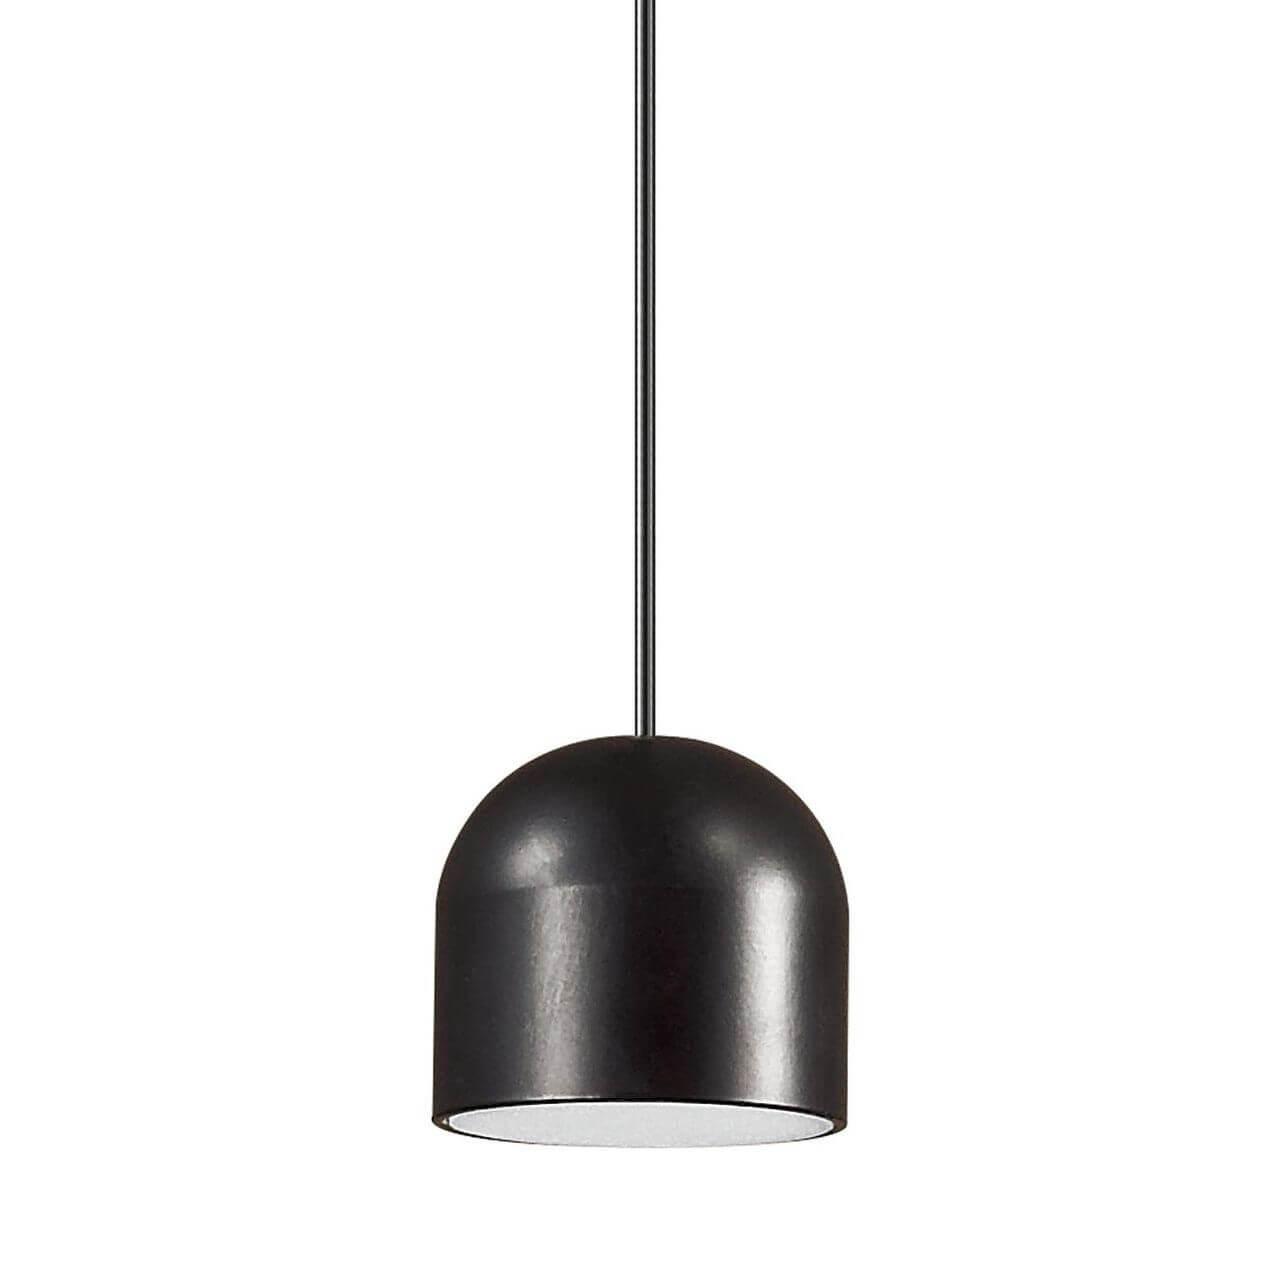    Ideal Lux Tall SP1 Small Nero 196800